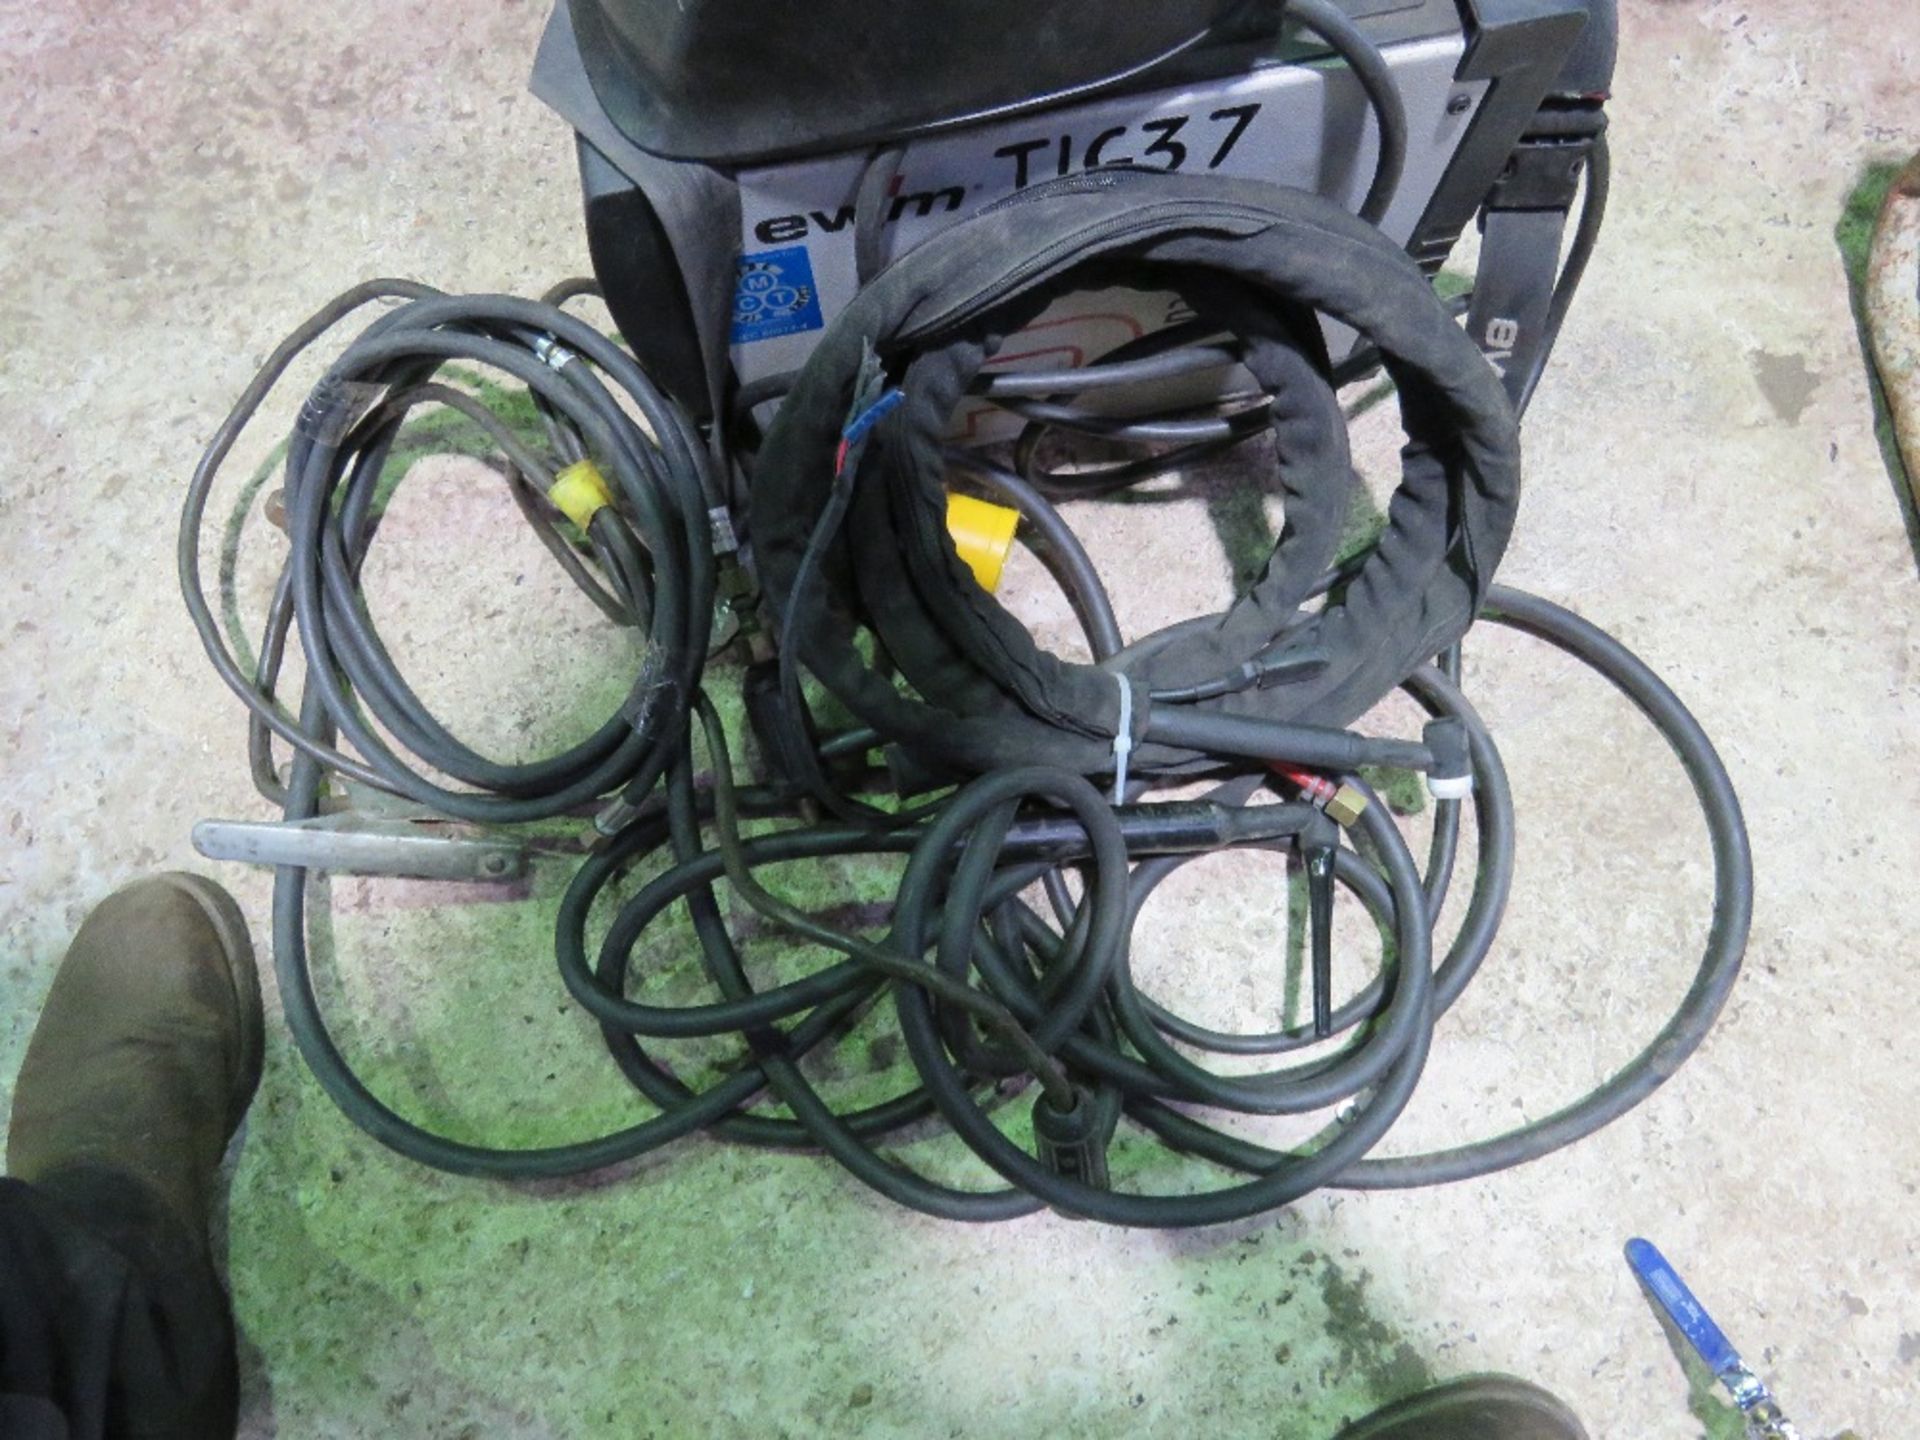 EWN P200 PICOTIG MV WELDER, 110VOLT WITH RODS PLUS 2 X HELMETS AS SHOWN.....THIS LOT IS SOLD UNDER T - Image 6 of 9